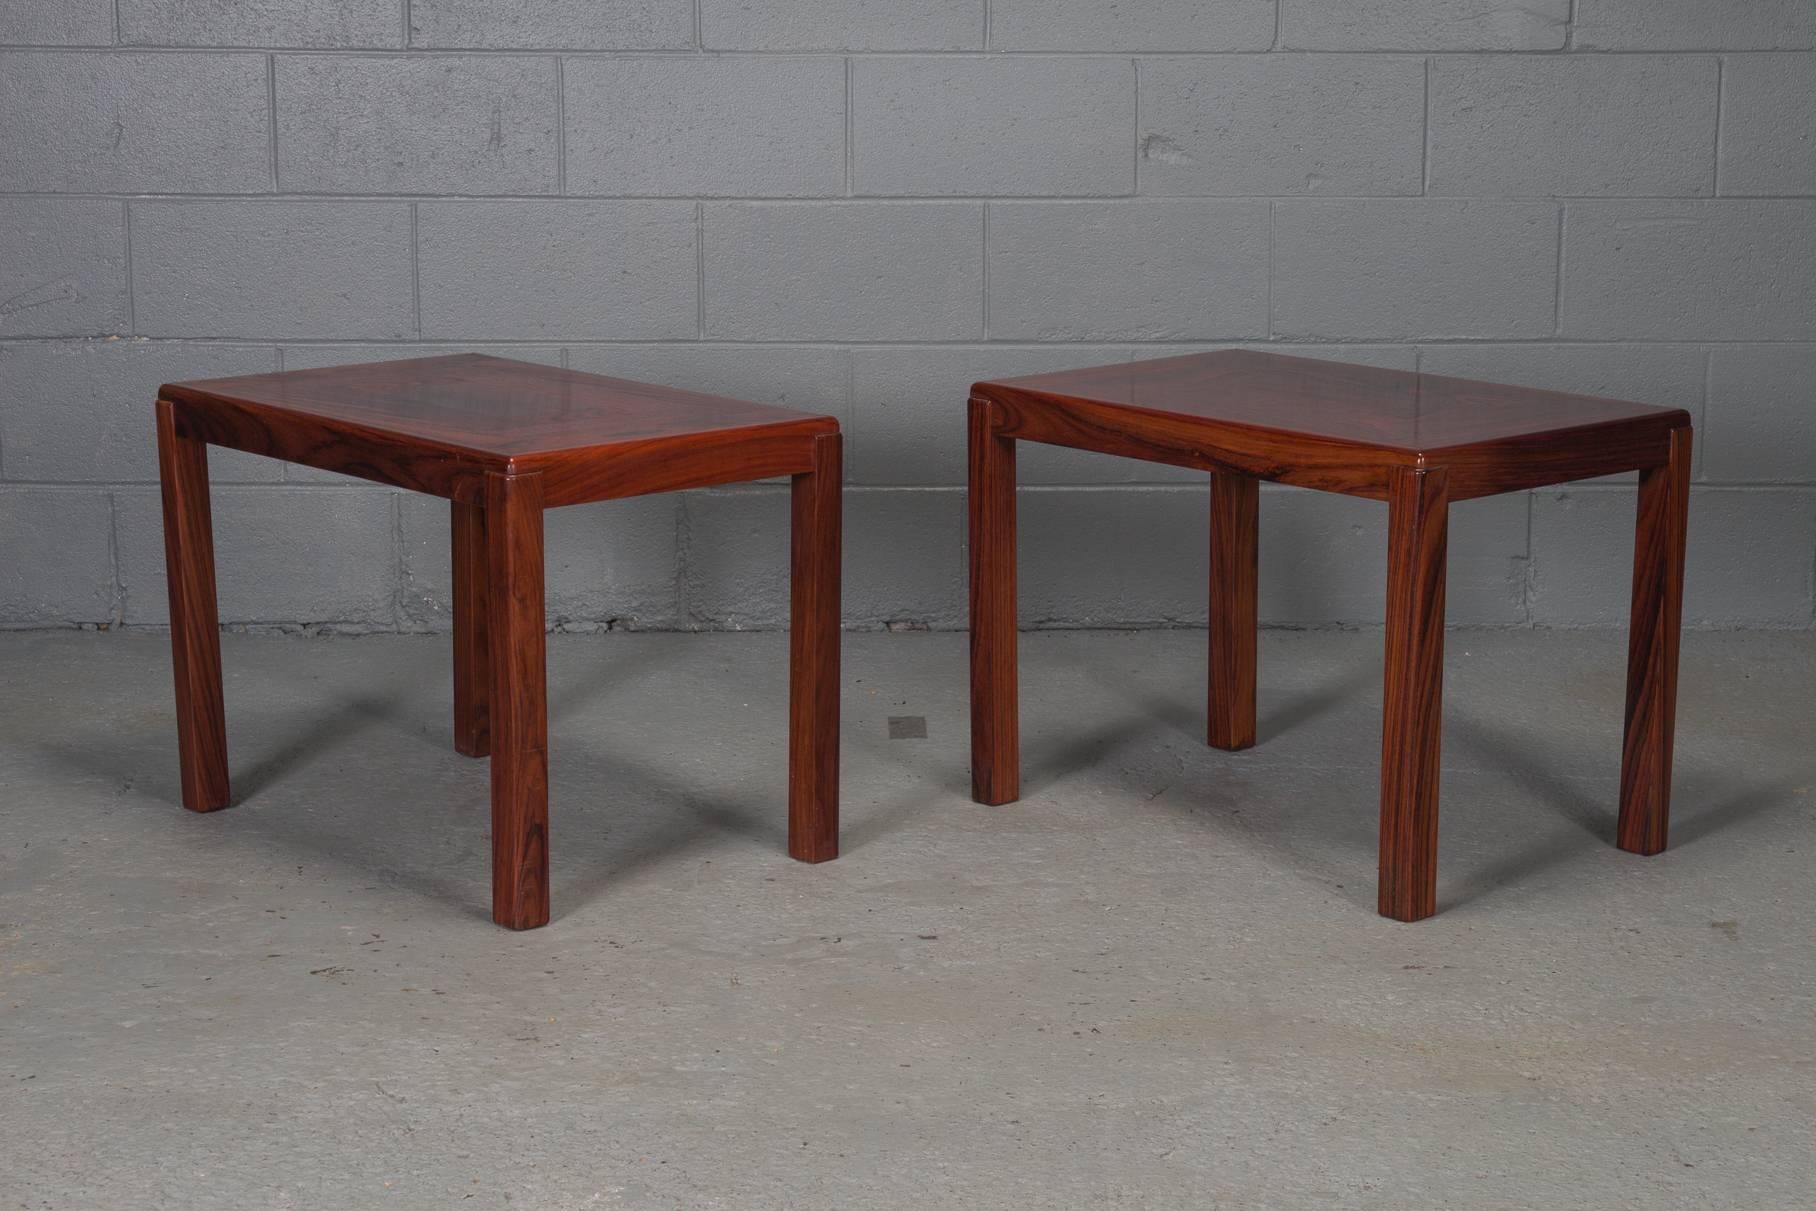 Pair of Danish modern rosewood side tables.